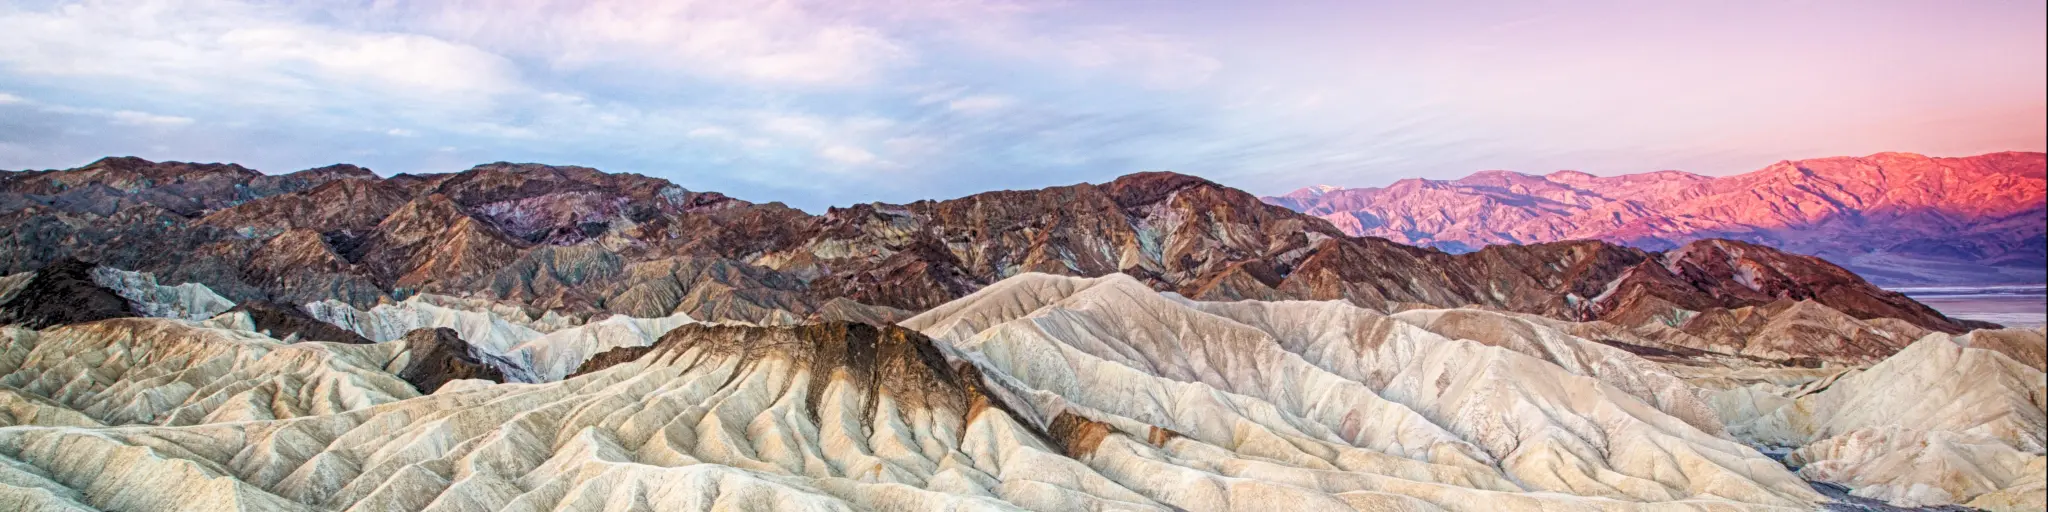 The sun rising over Zabriskie Point in Death Valley National Park, California with rugged rock formations and dunes in focus.